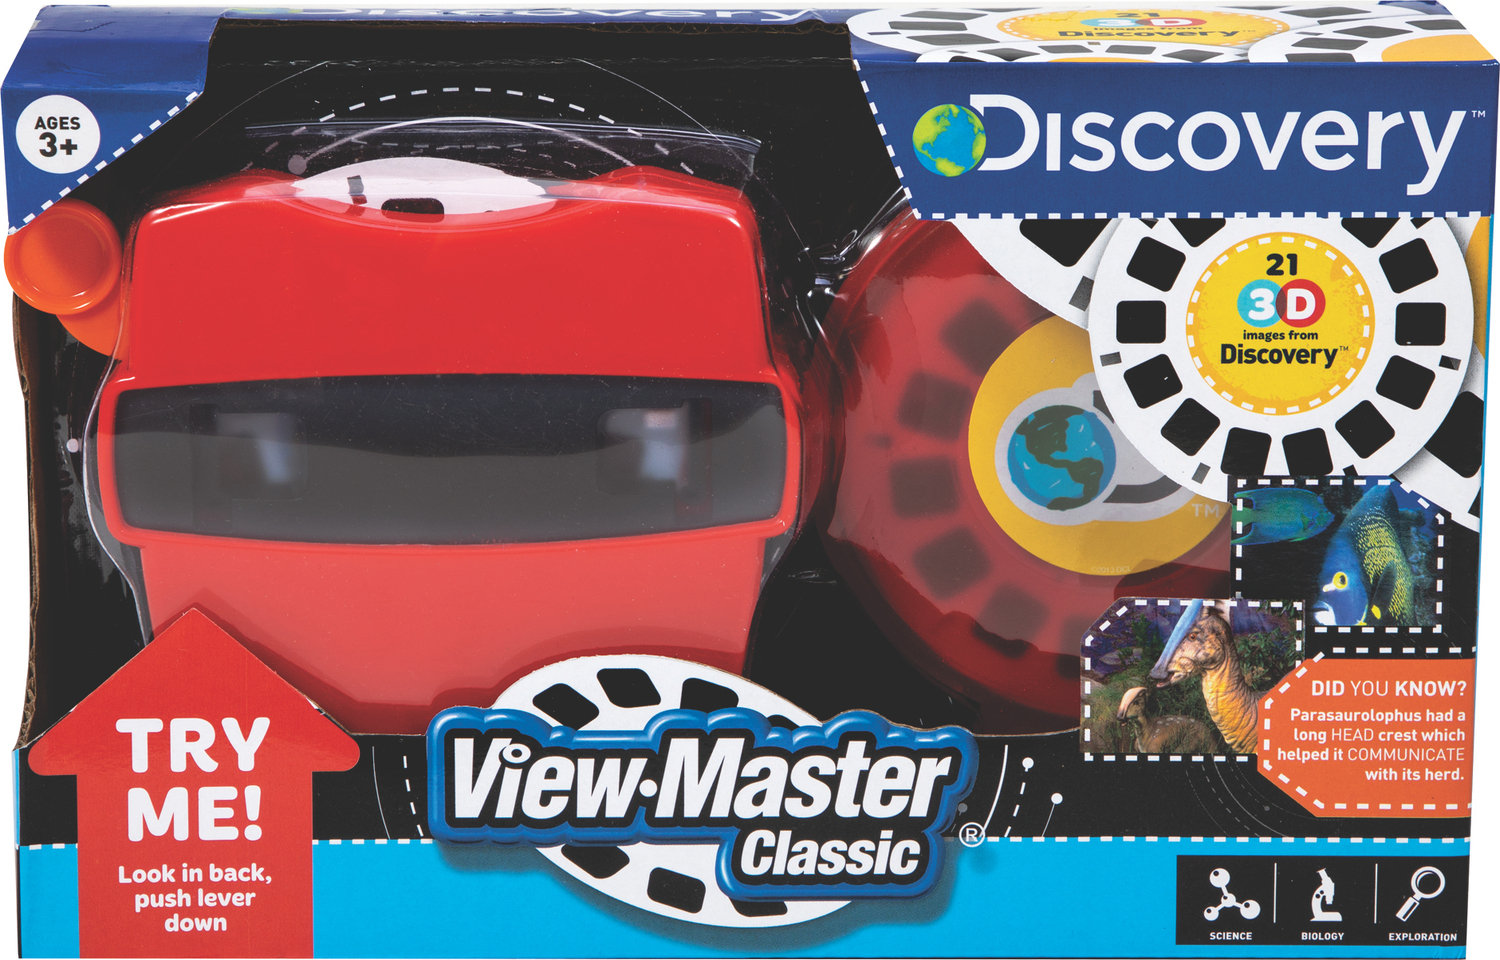  View Master Discovery Kids Marine Life : Toys & Games